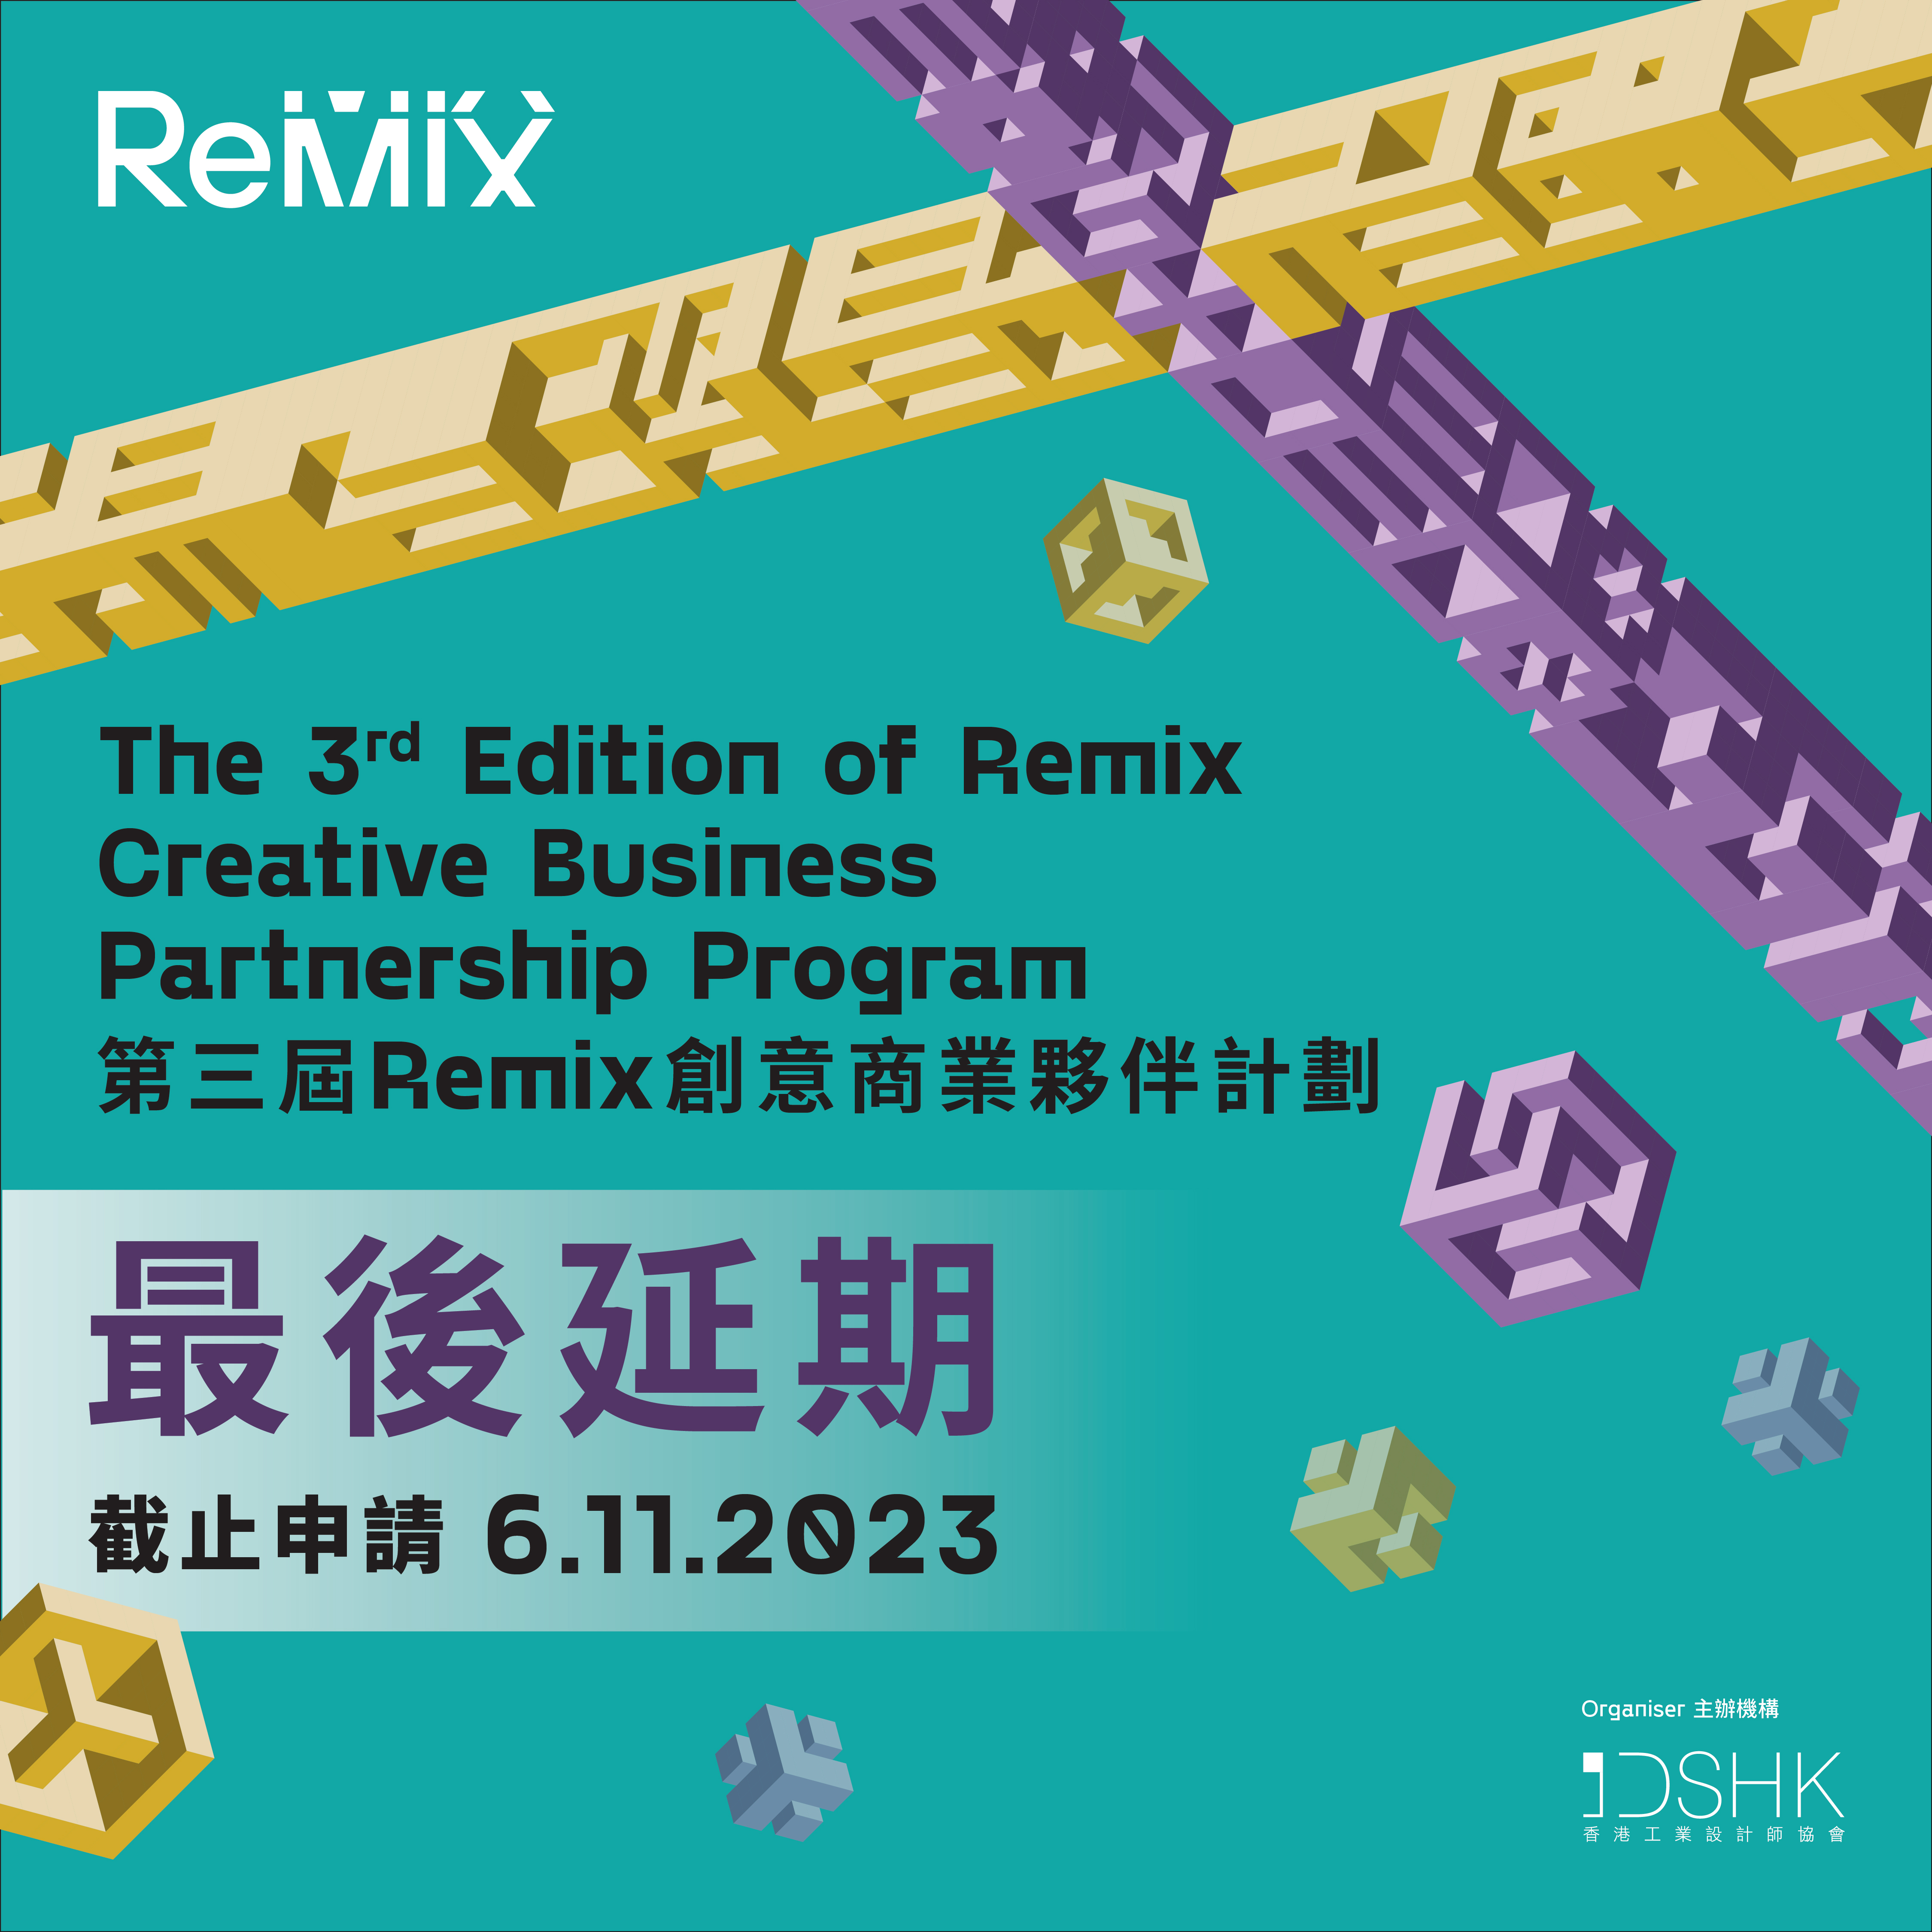 Supporting Event - The 3rd edition of ReMIX Creative Business Partnership Program